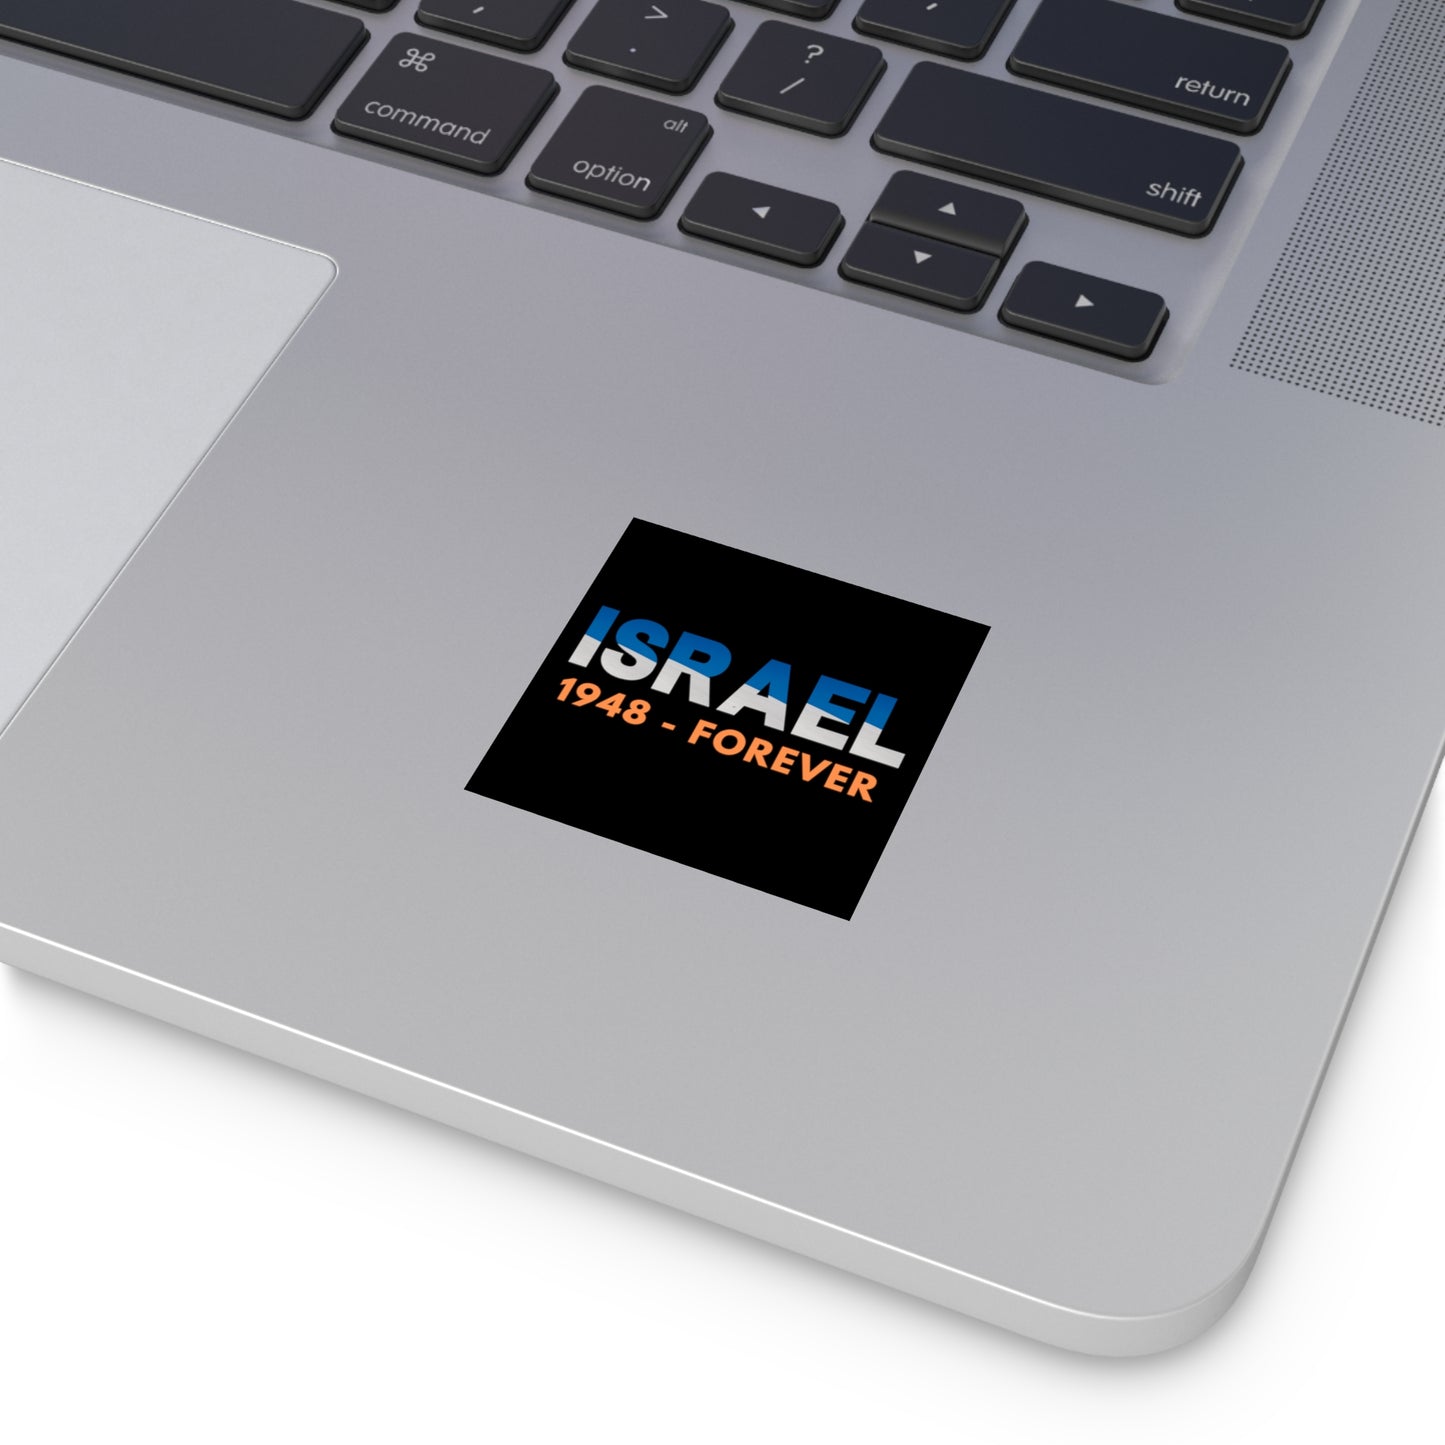 Israel 1948-Forever Square Stickers, Indoor\Outdoor